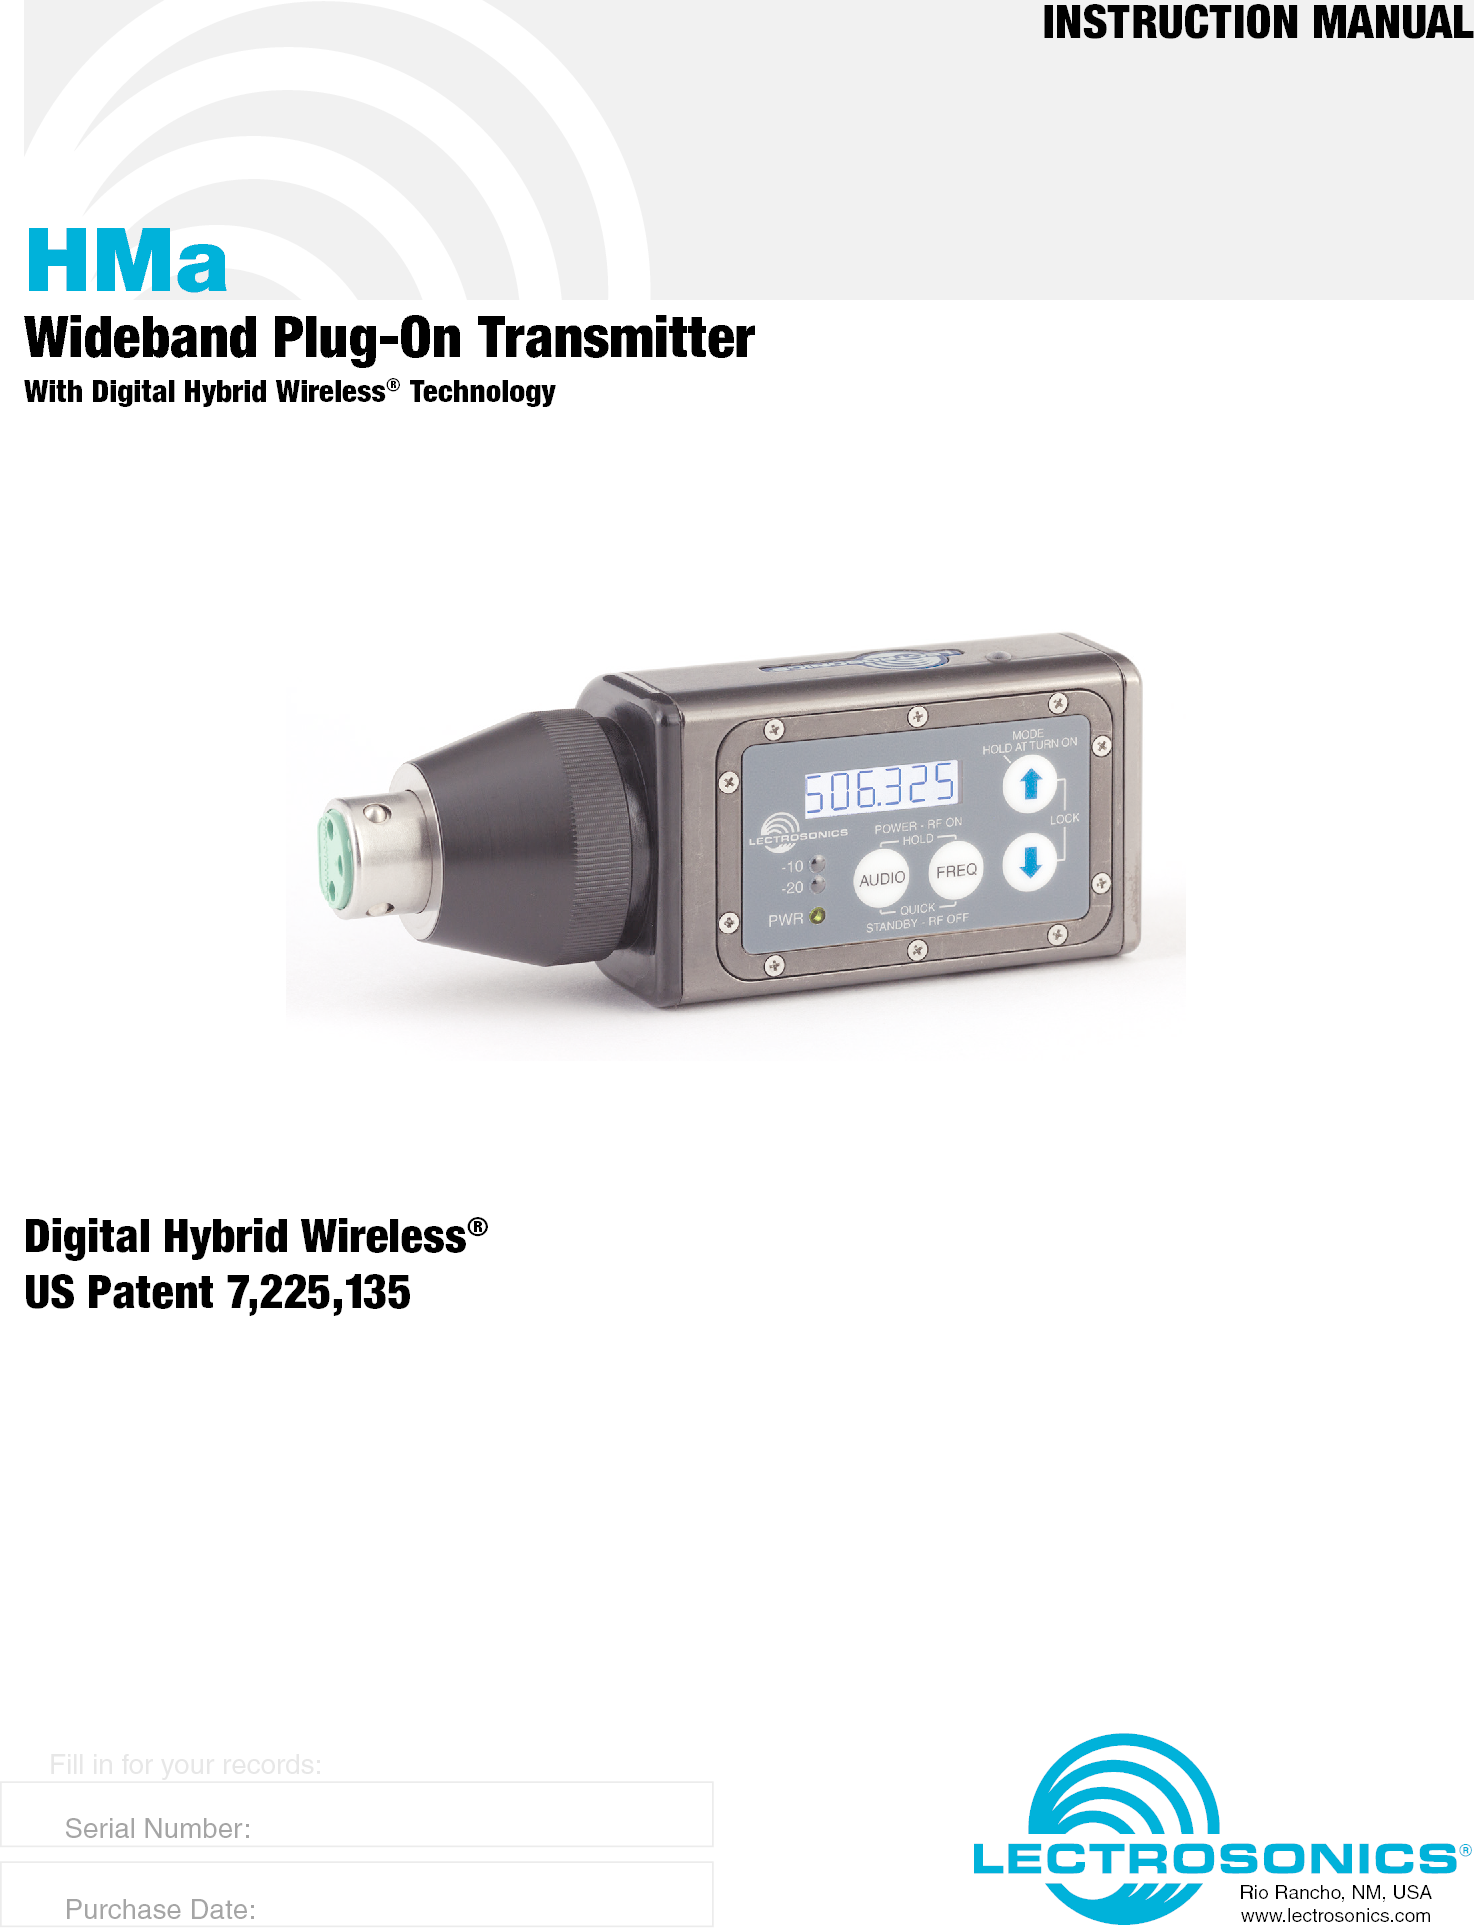 HMaWideband Plug-On TransmitterWith Digital Hybrid Wireless® TechnologyINSTRUCTION MANUALRio Rancho, NM, USAwww.lectrosonics.comFill in for your records:  Serial Number:  Purchase Date:Digital Hybrid Wireless®US Patent 7,225,135